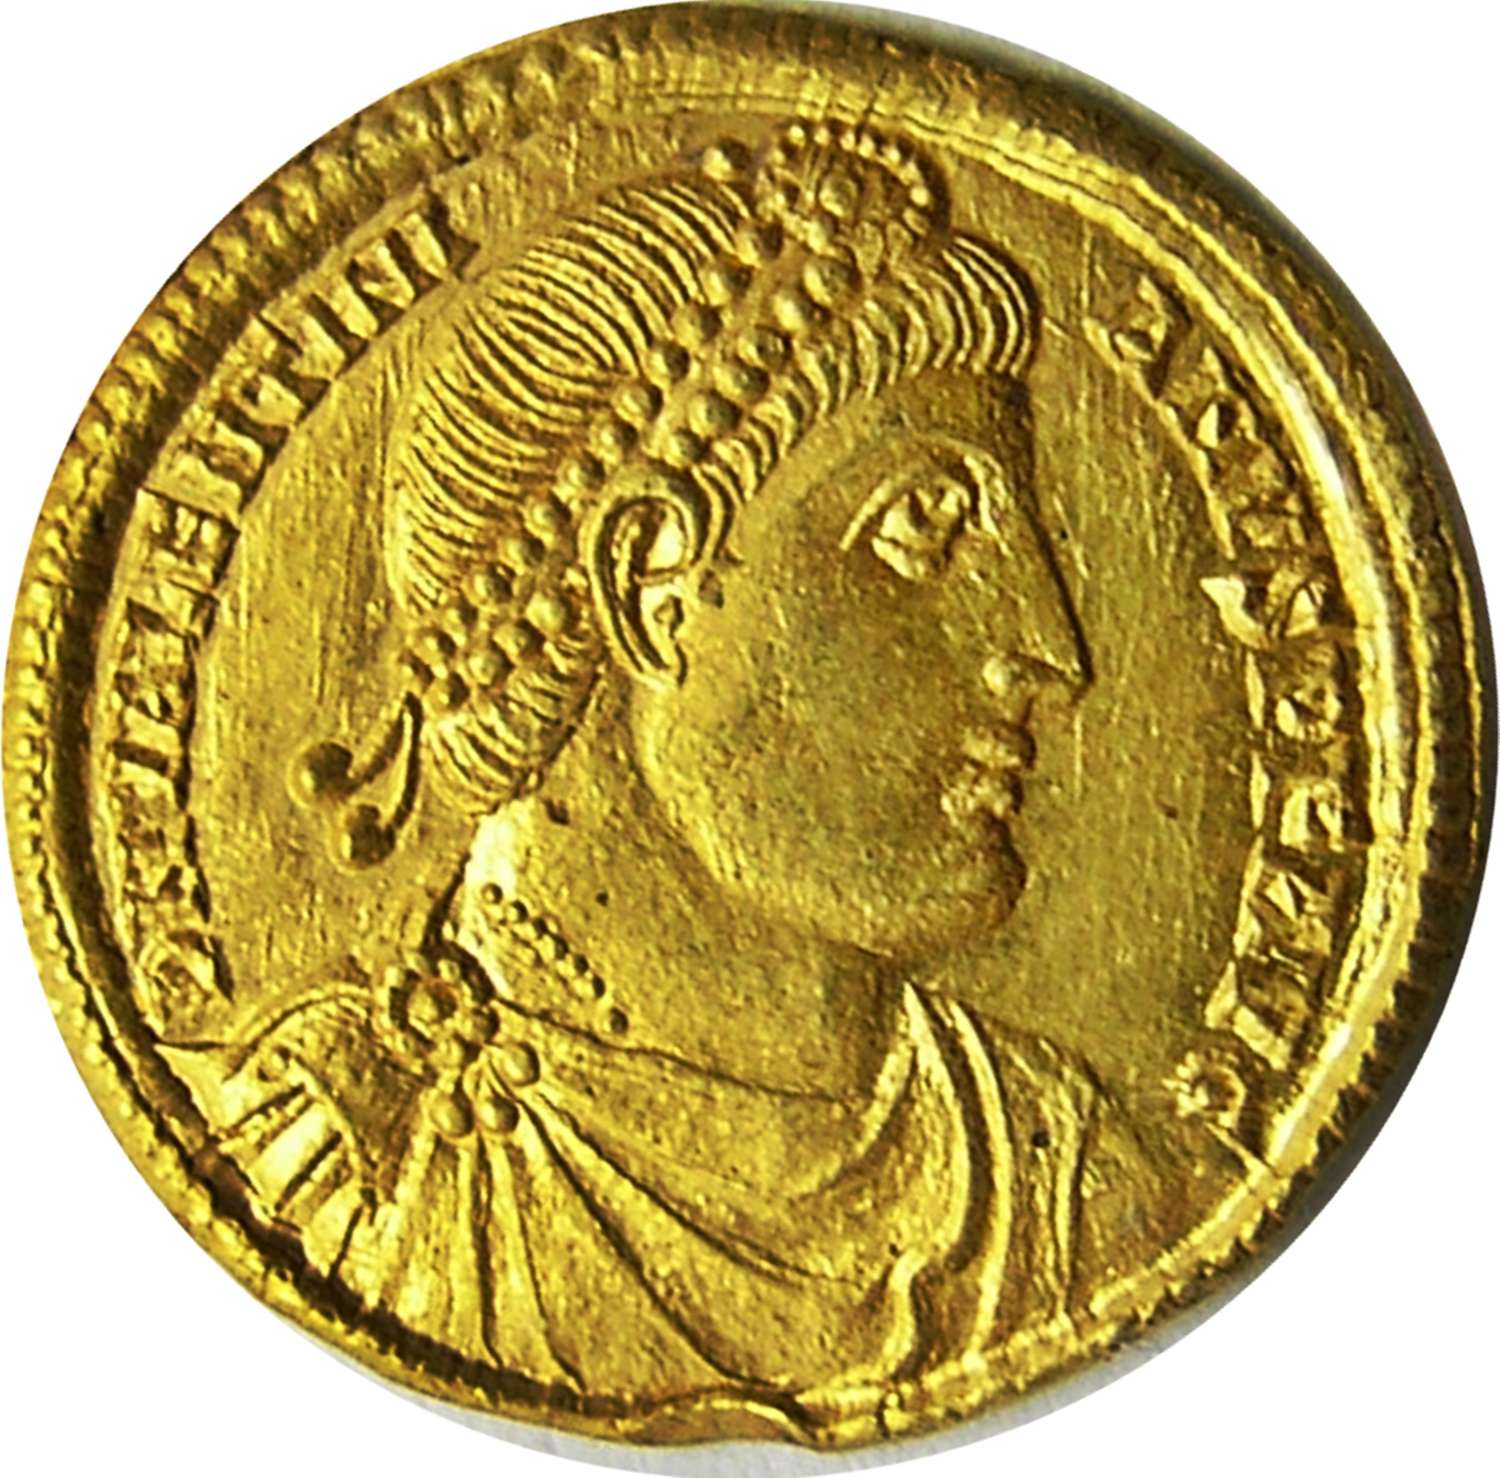 Roman Gold Solidus of Emperor Valentinian minted in Antioch